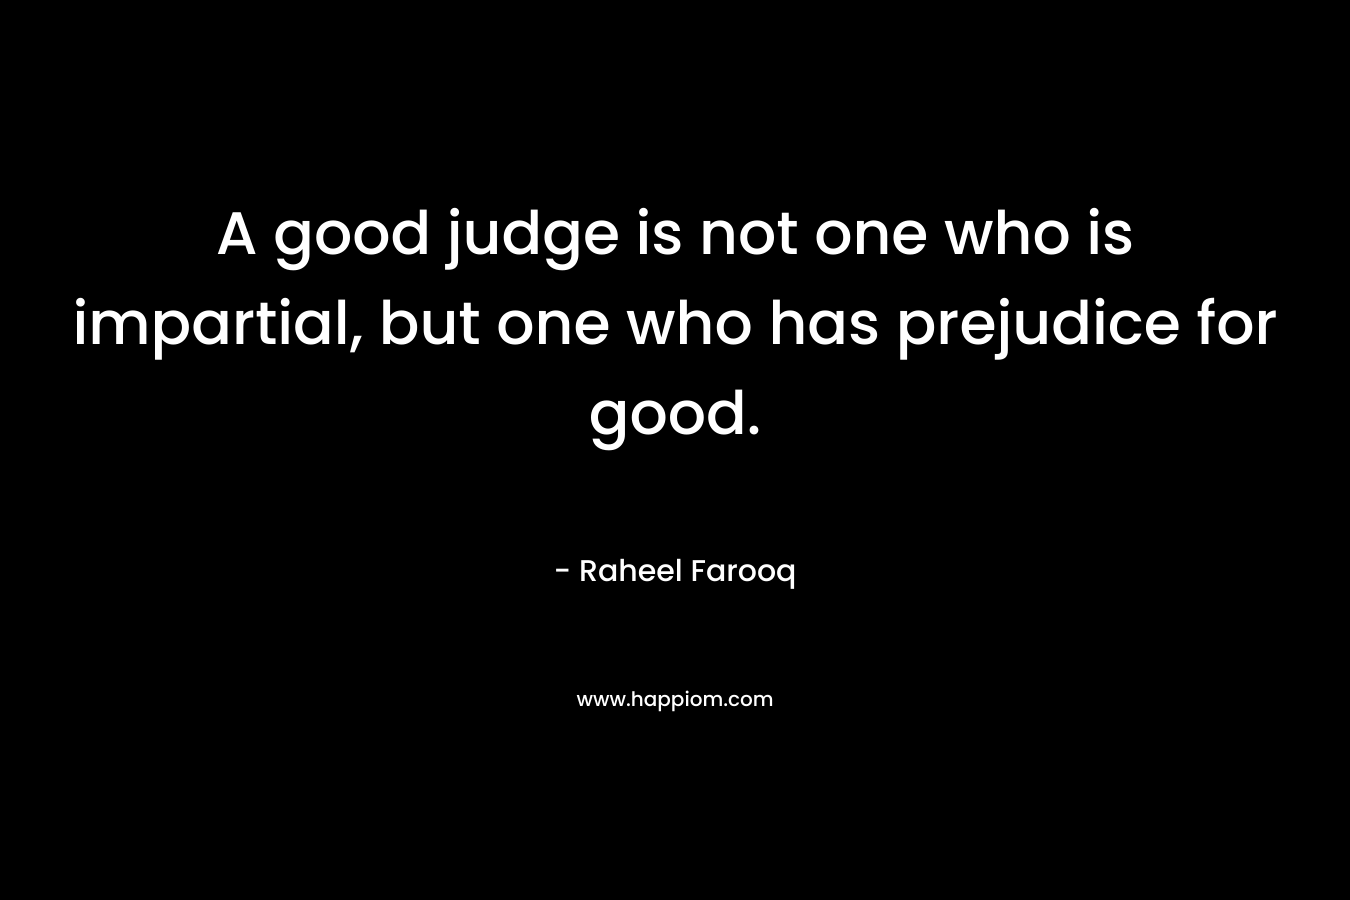 A good judge is not one who is impartial, but one who has prejudice for good.